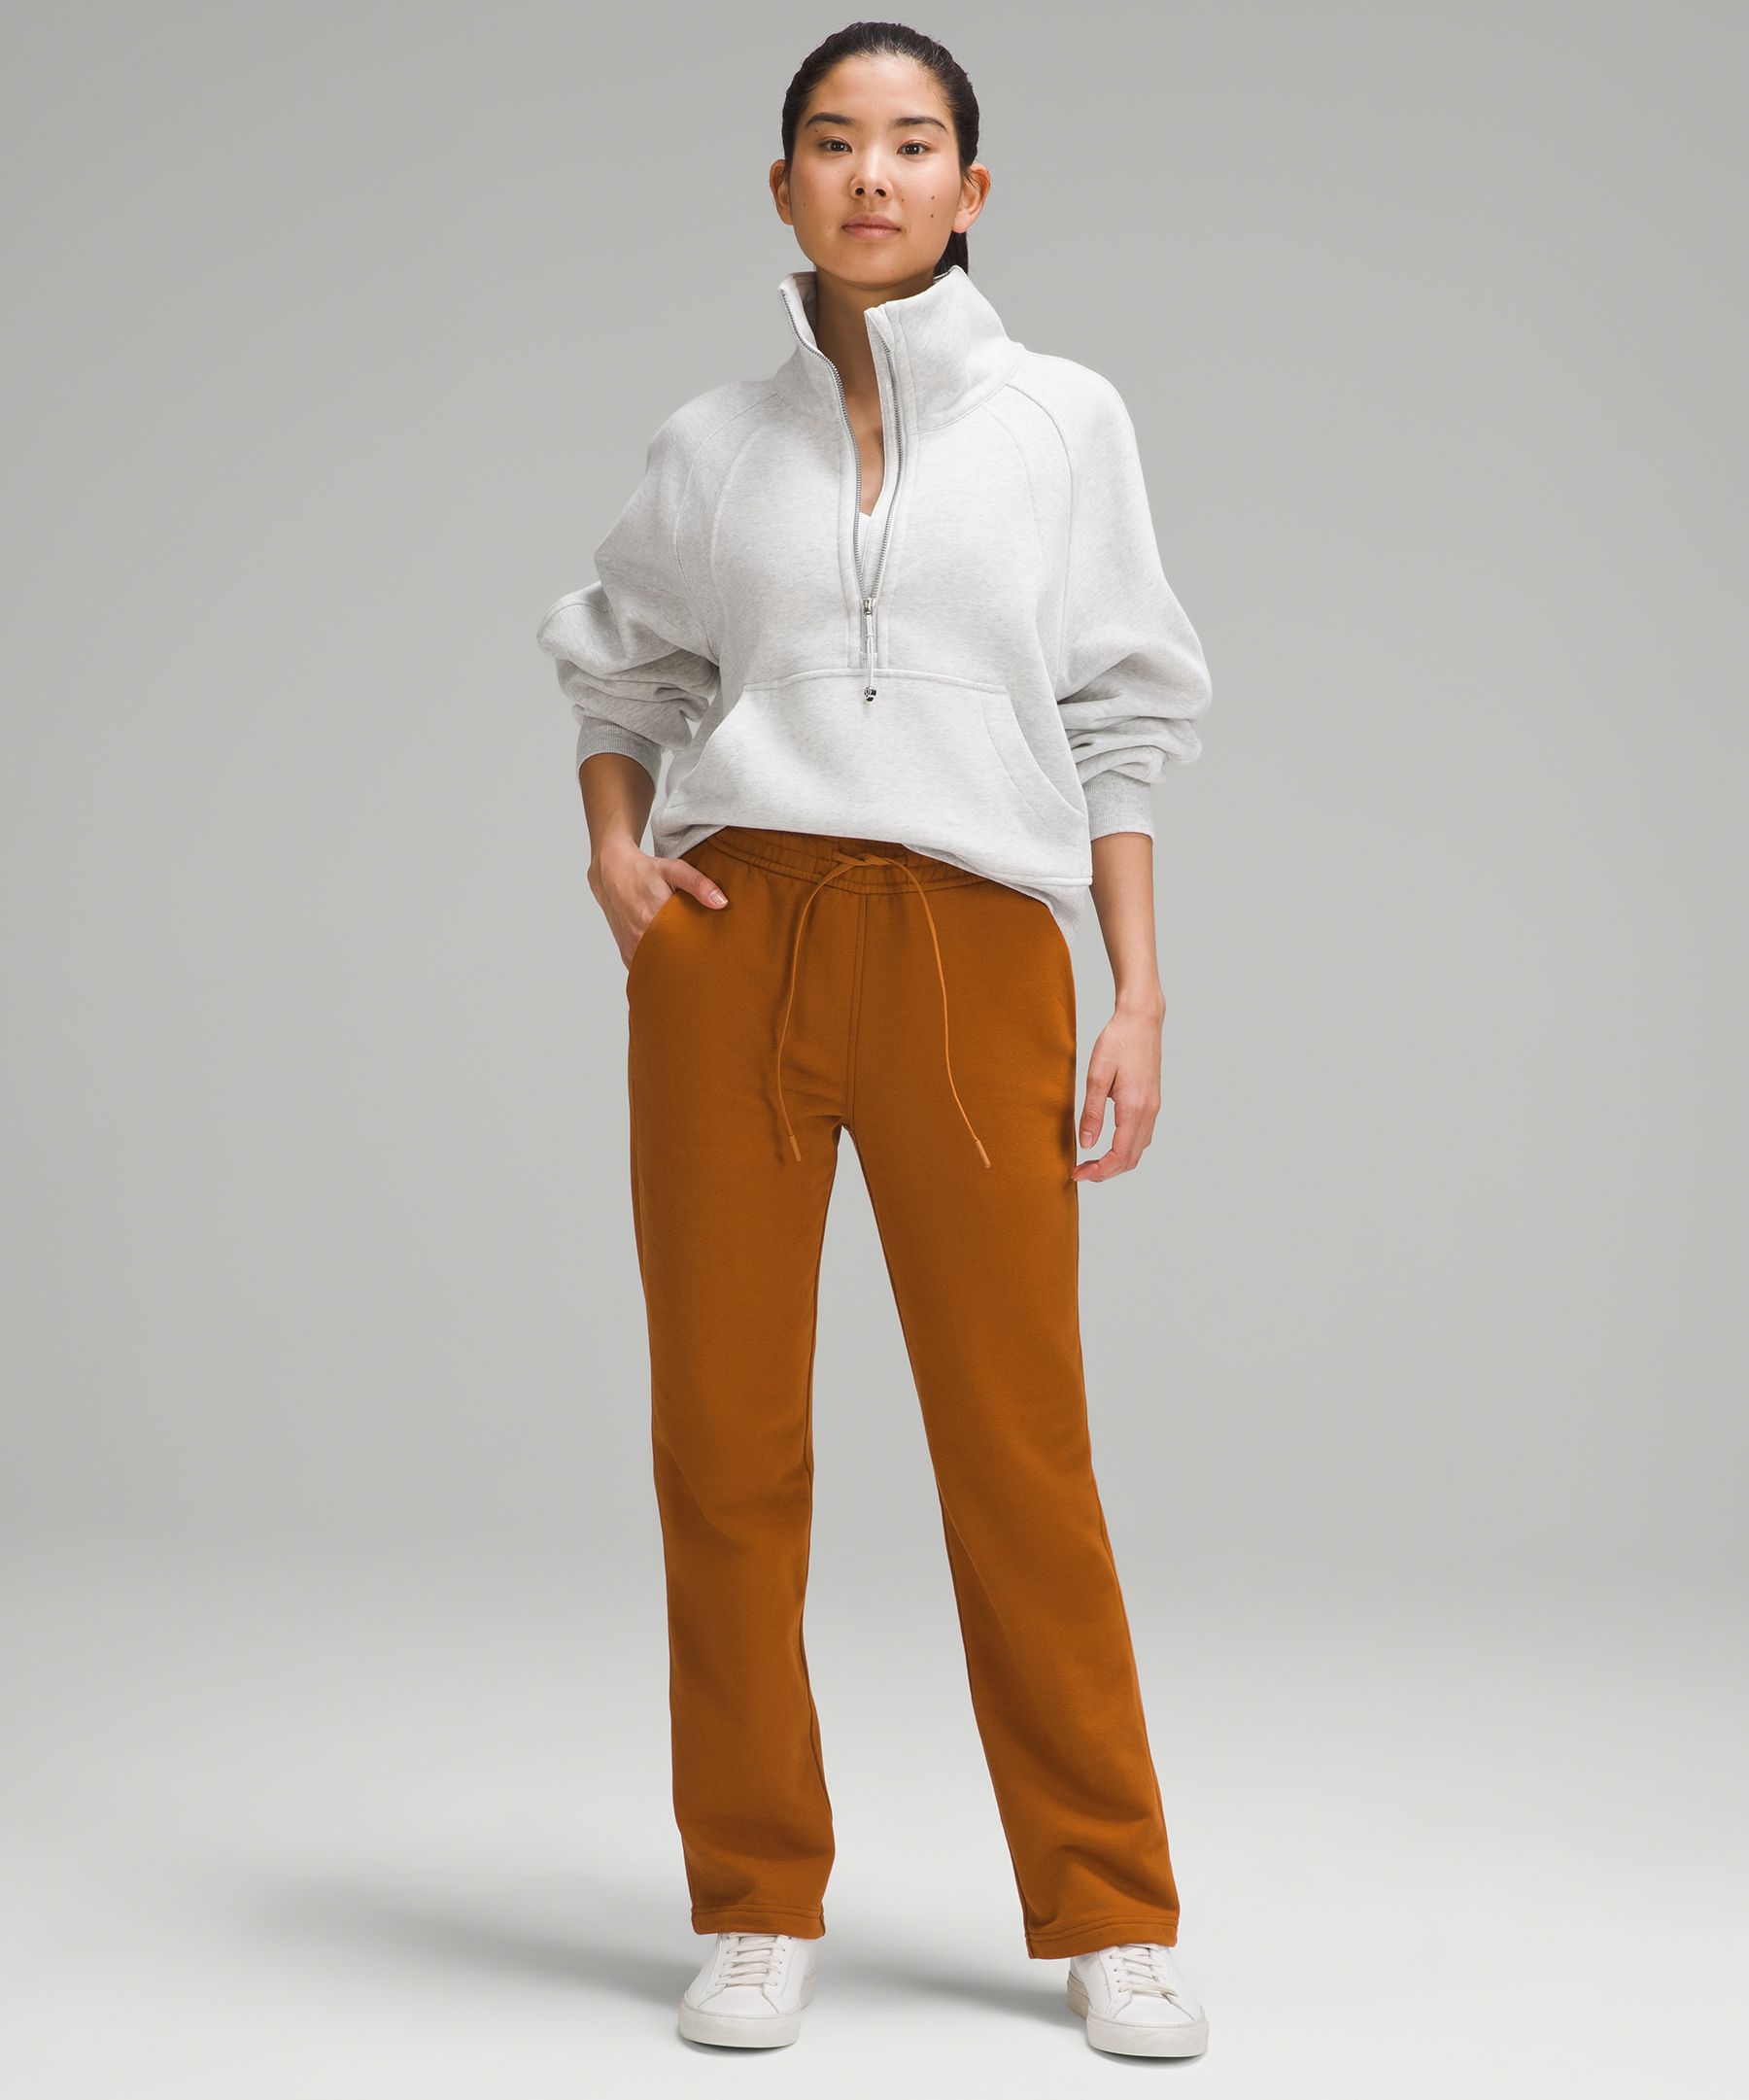 Loungeful Straight Leg Pant opinions? Does anyone have these to